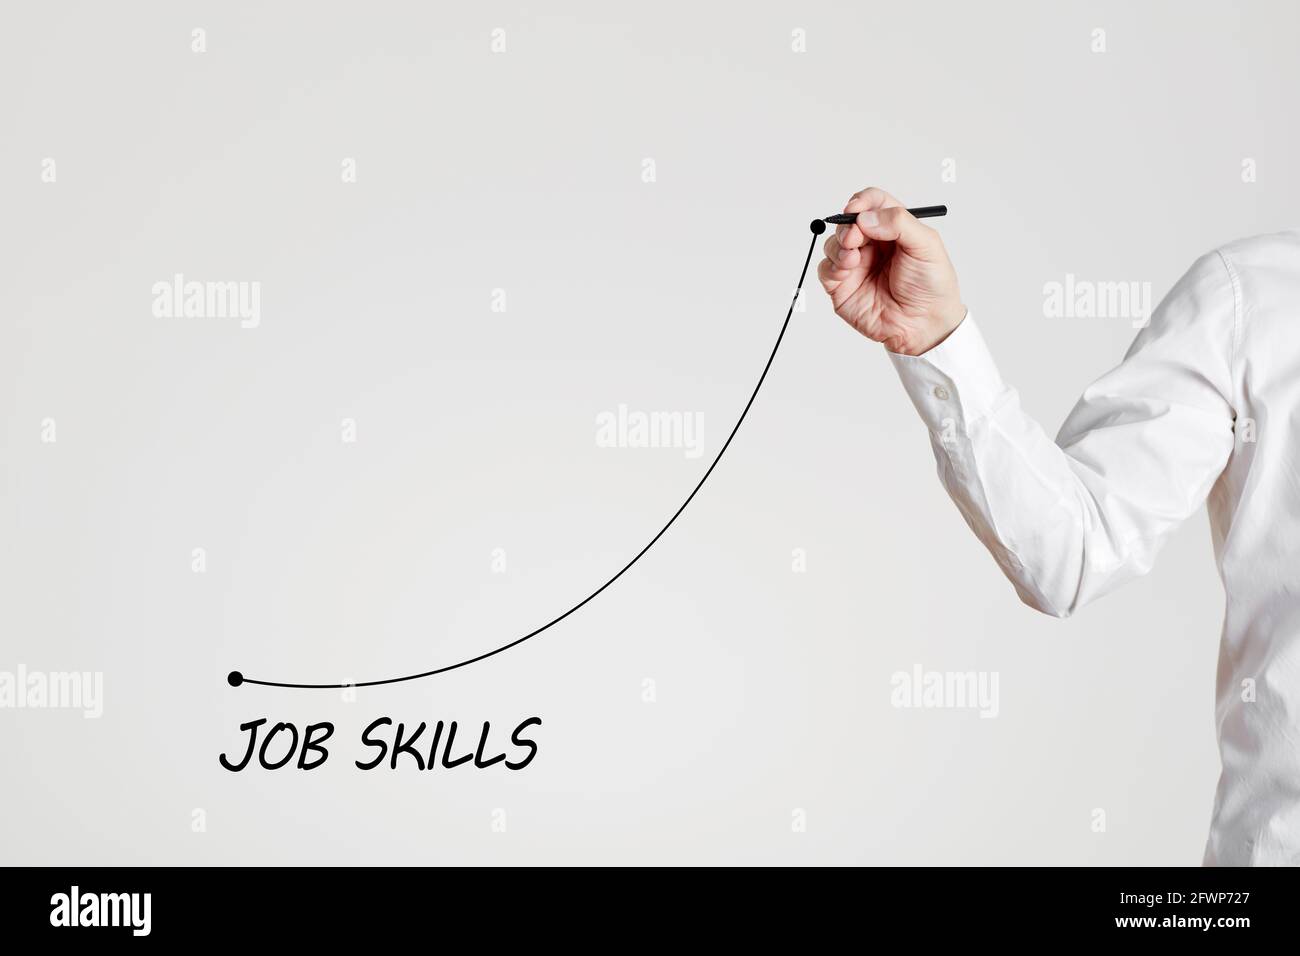 Businessman hand draws a rising line with the word job skills. Increasing business job skills with training or experience concept. Stock Photo